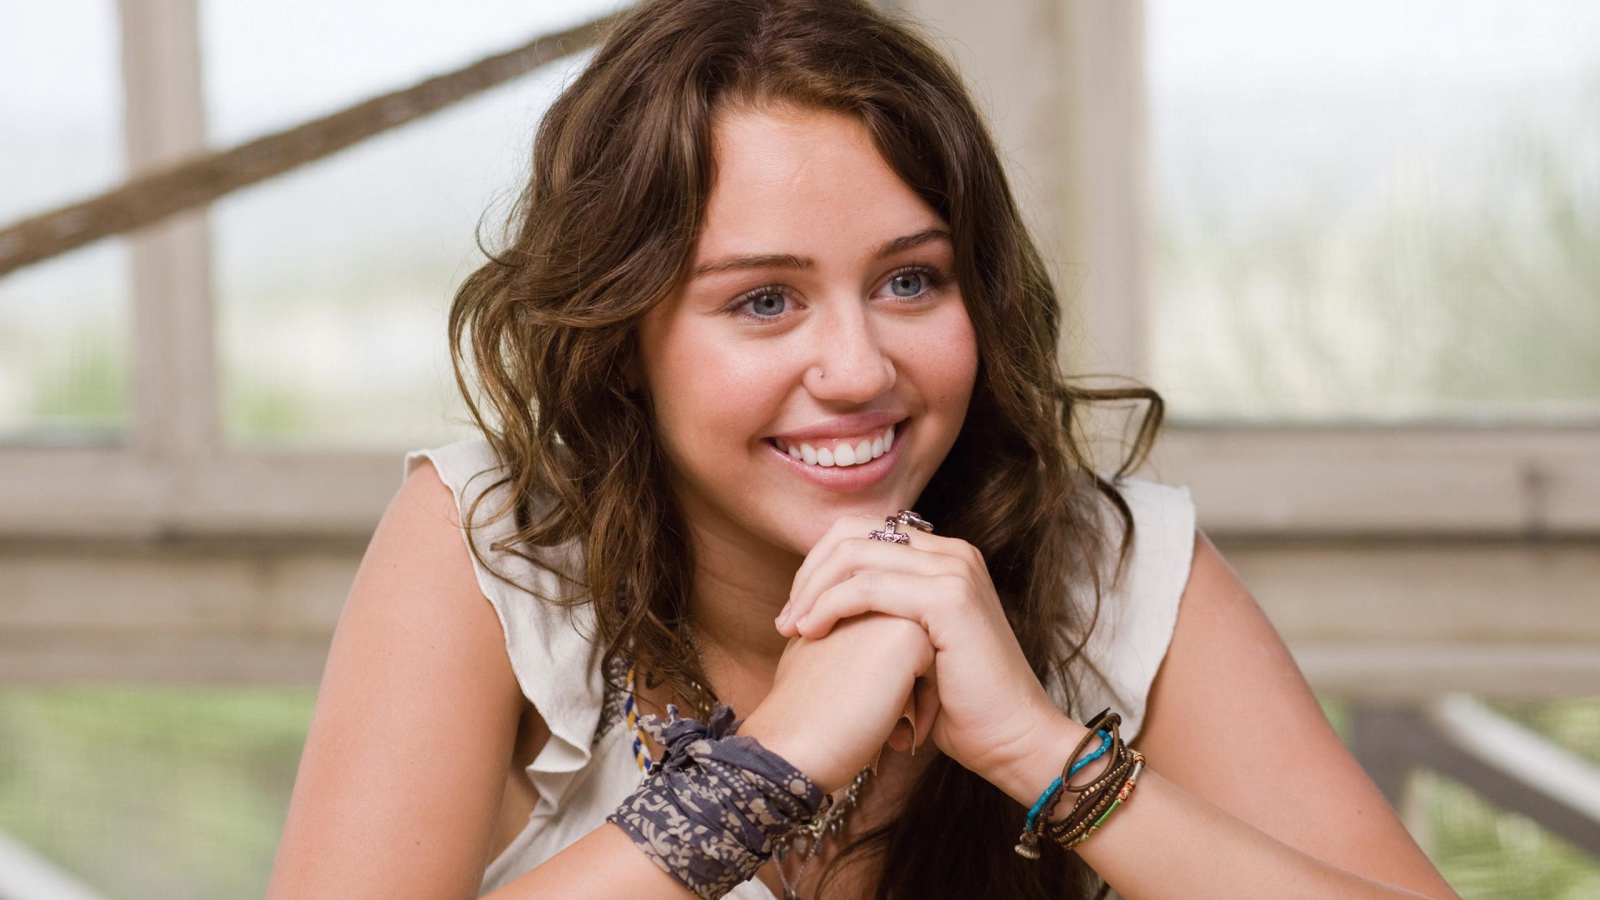 Beautiful Miley Cyrus with a cute smile